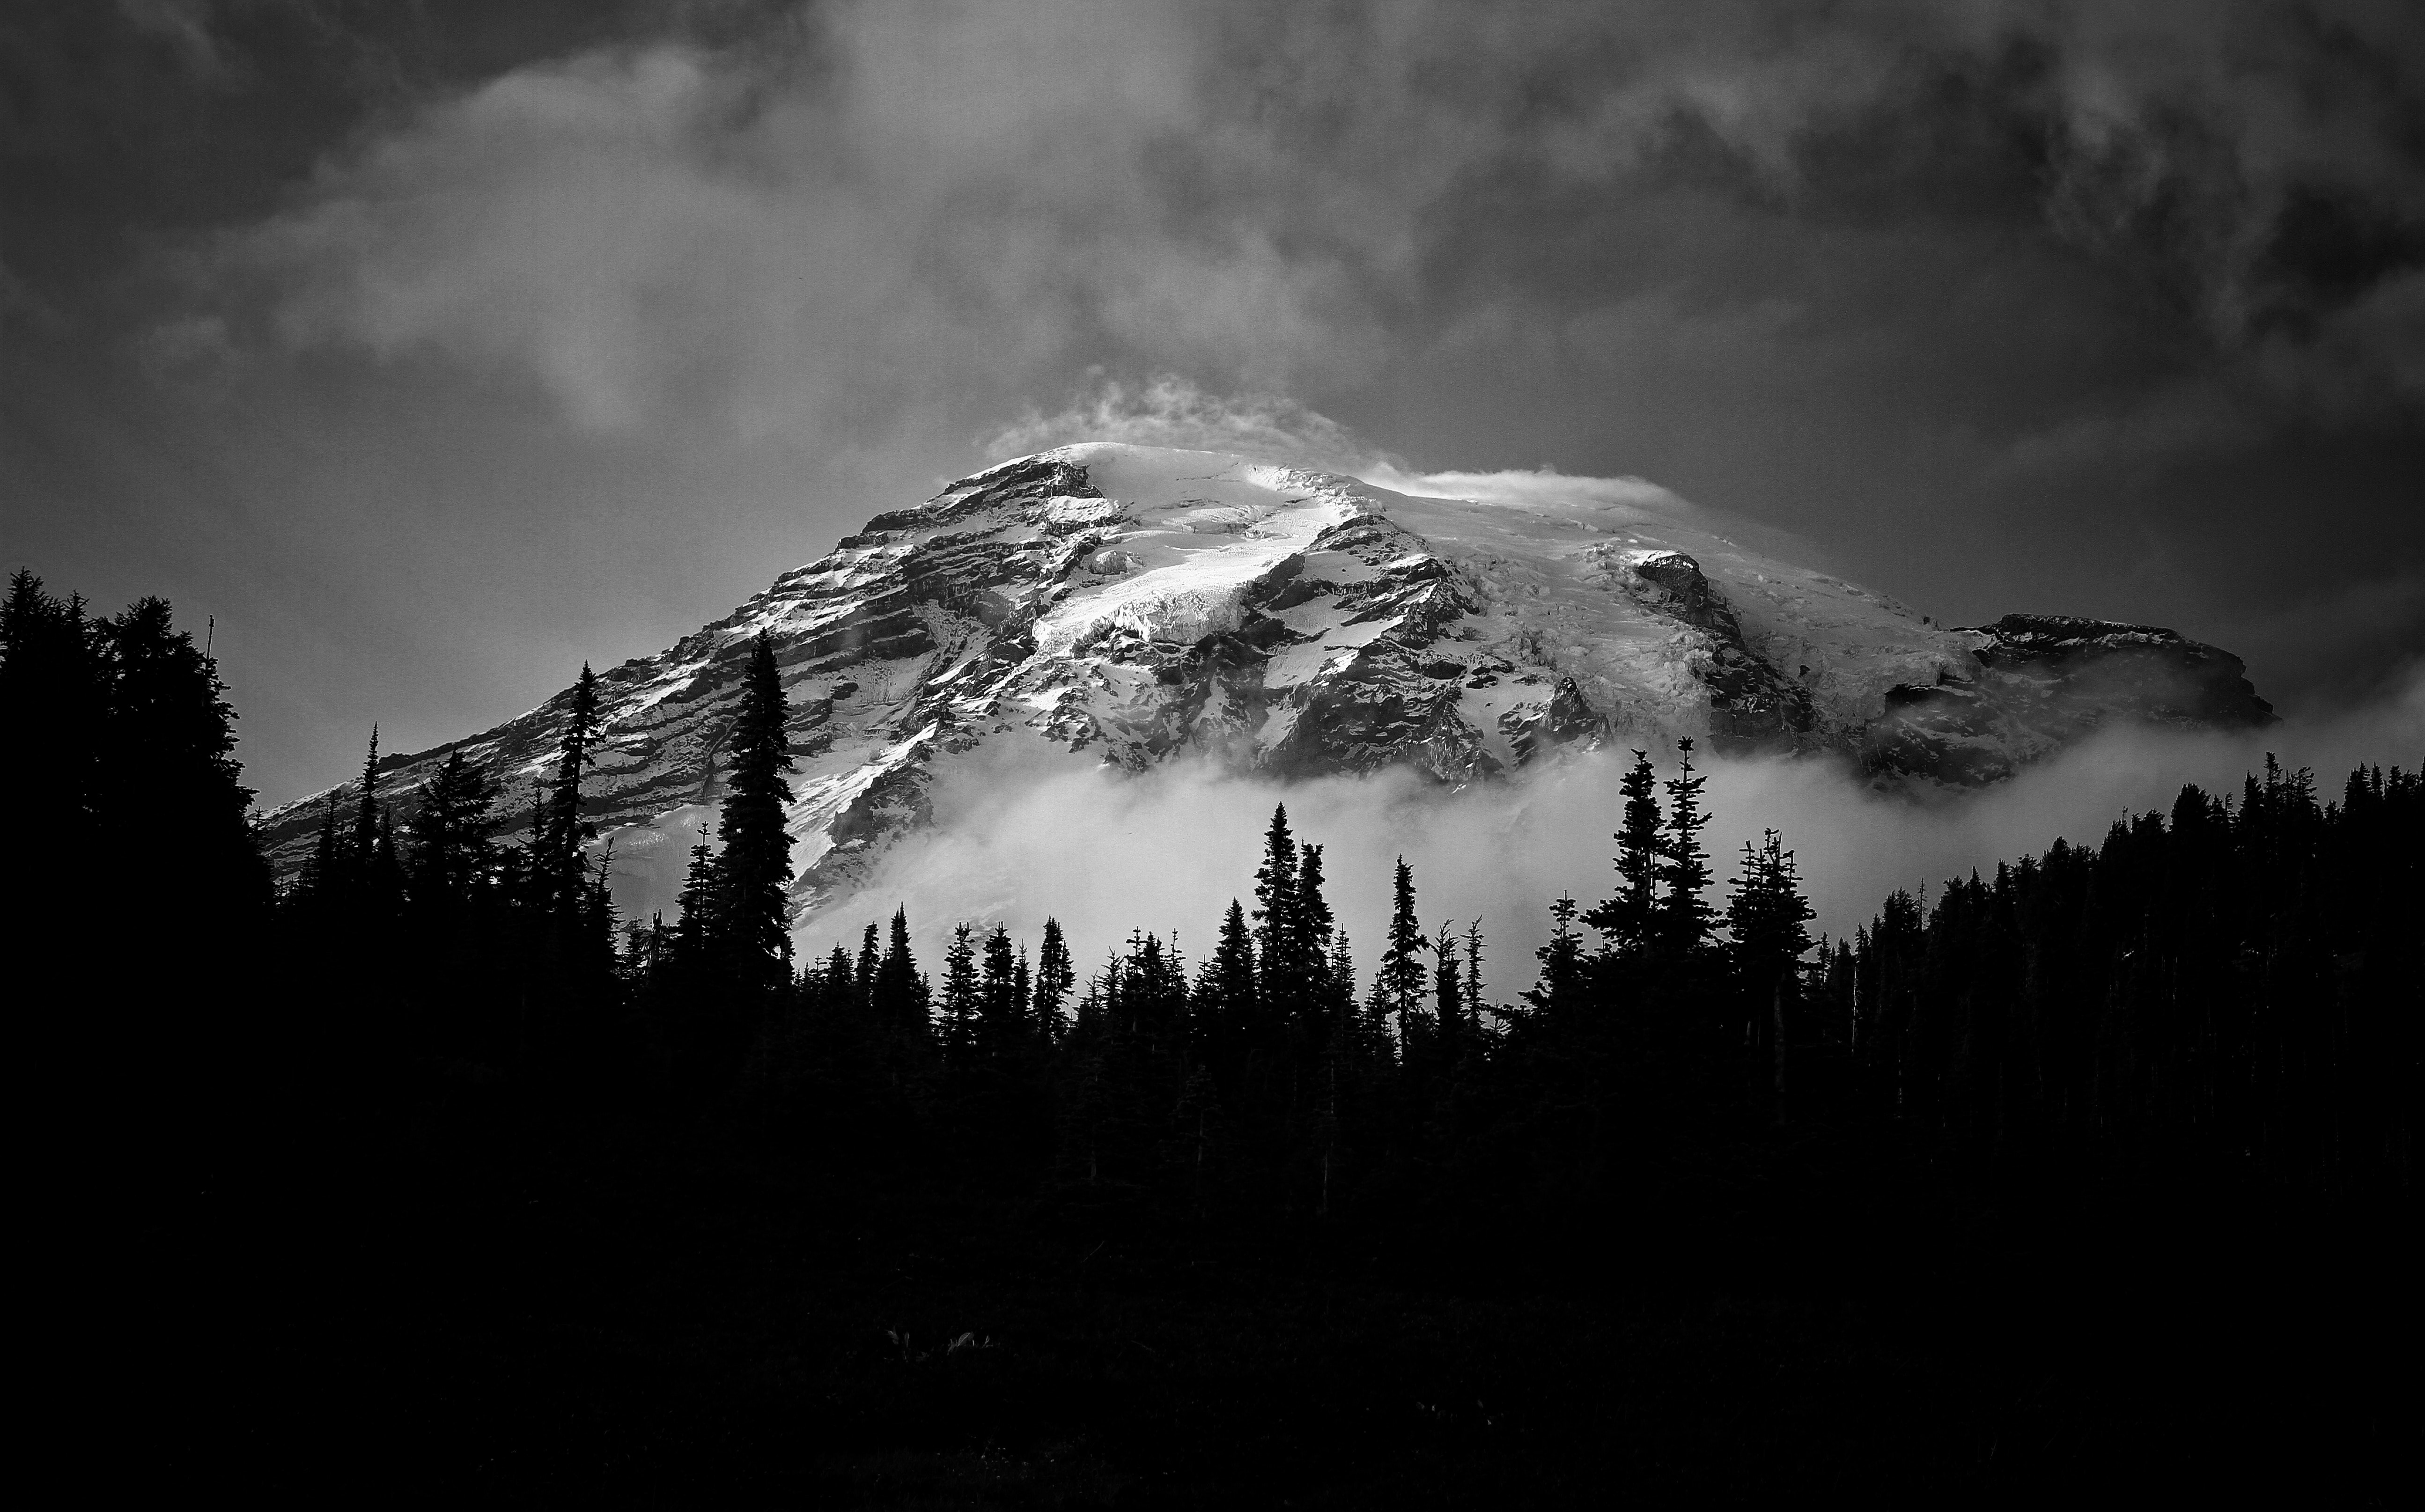 Grayscale photo of a mountain covered with snow